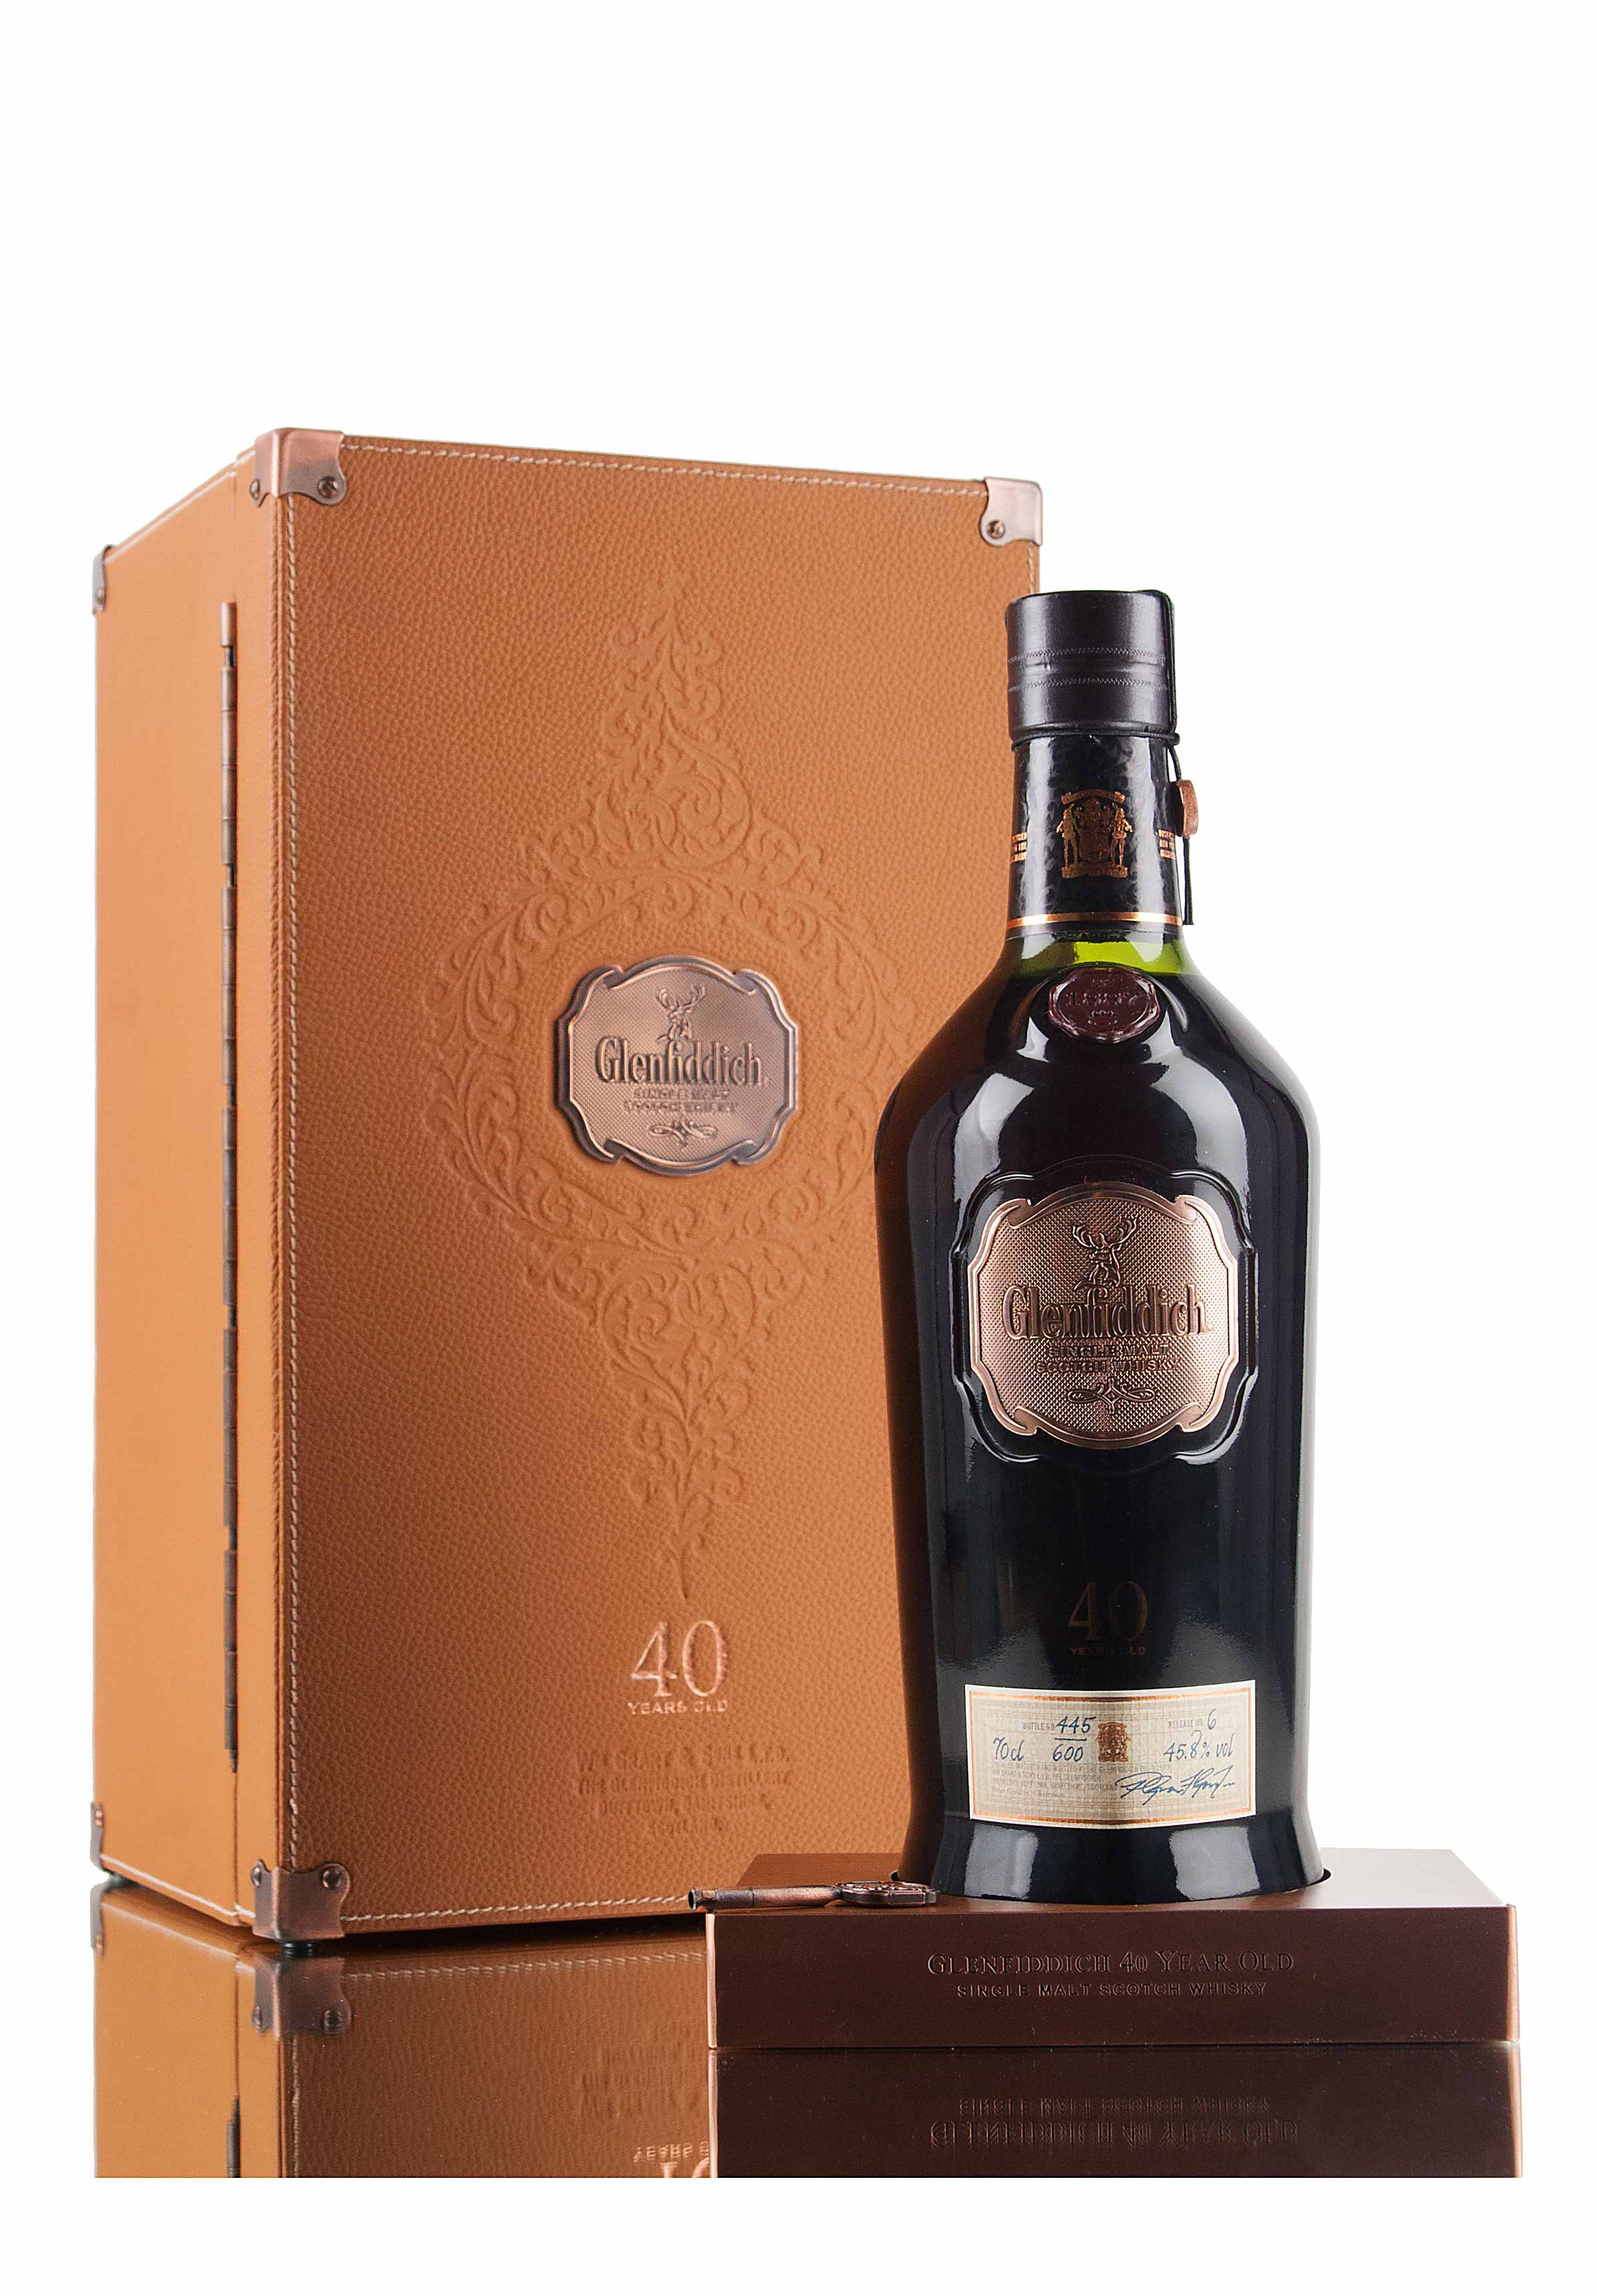 Glenfiddich 40 Year Old, Release No.6